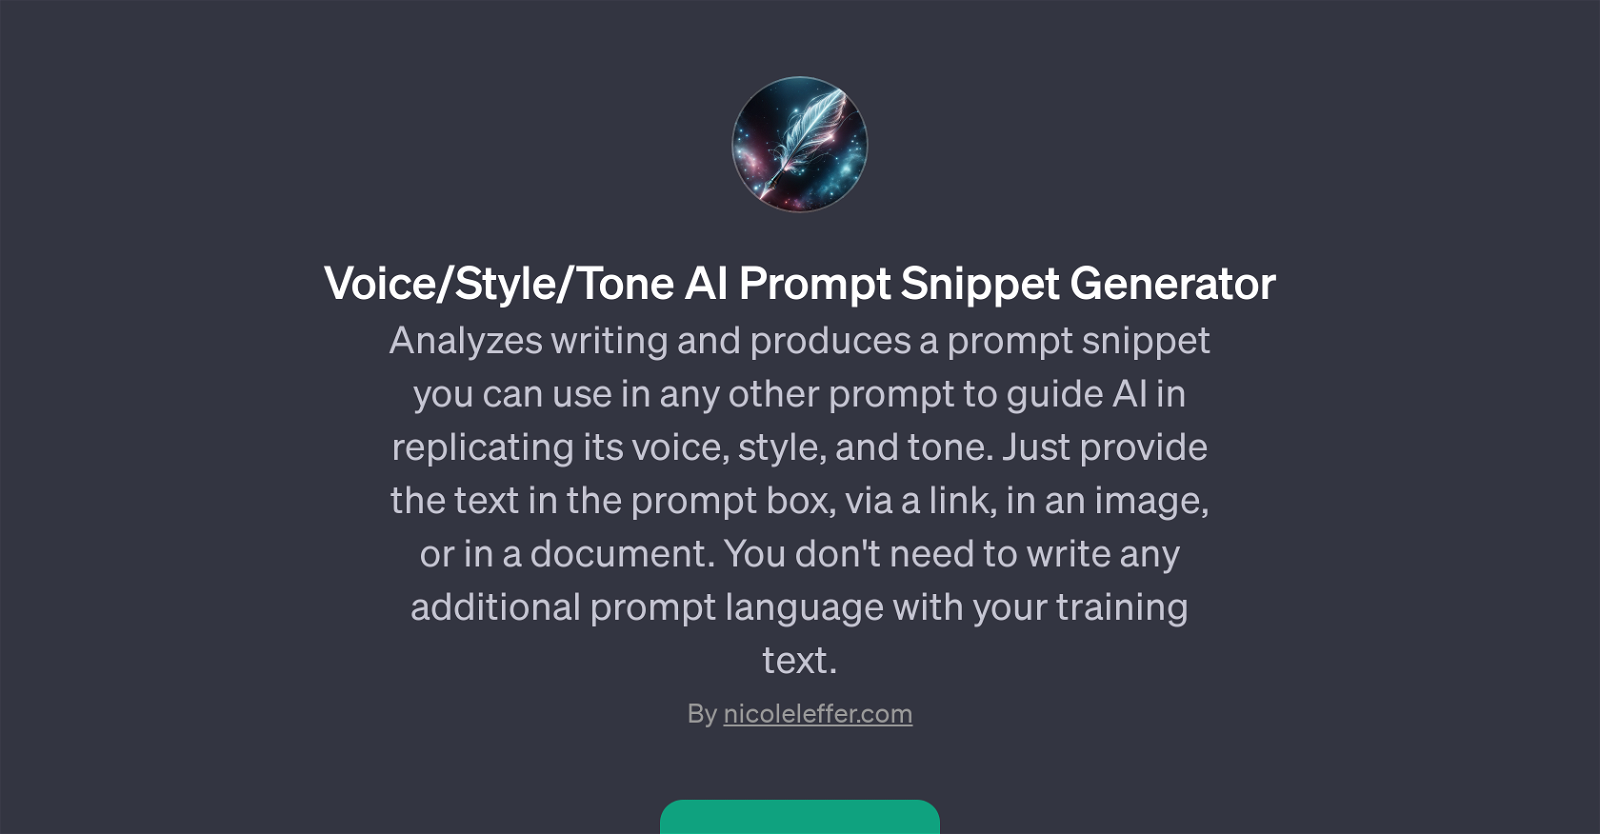 Voice/Style/Tone AI Prompt Snippet Generator website